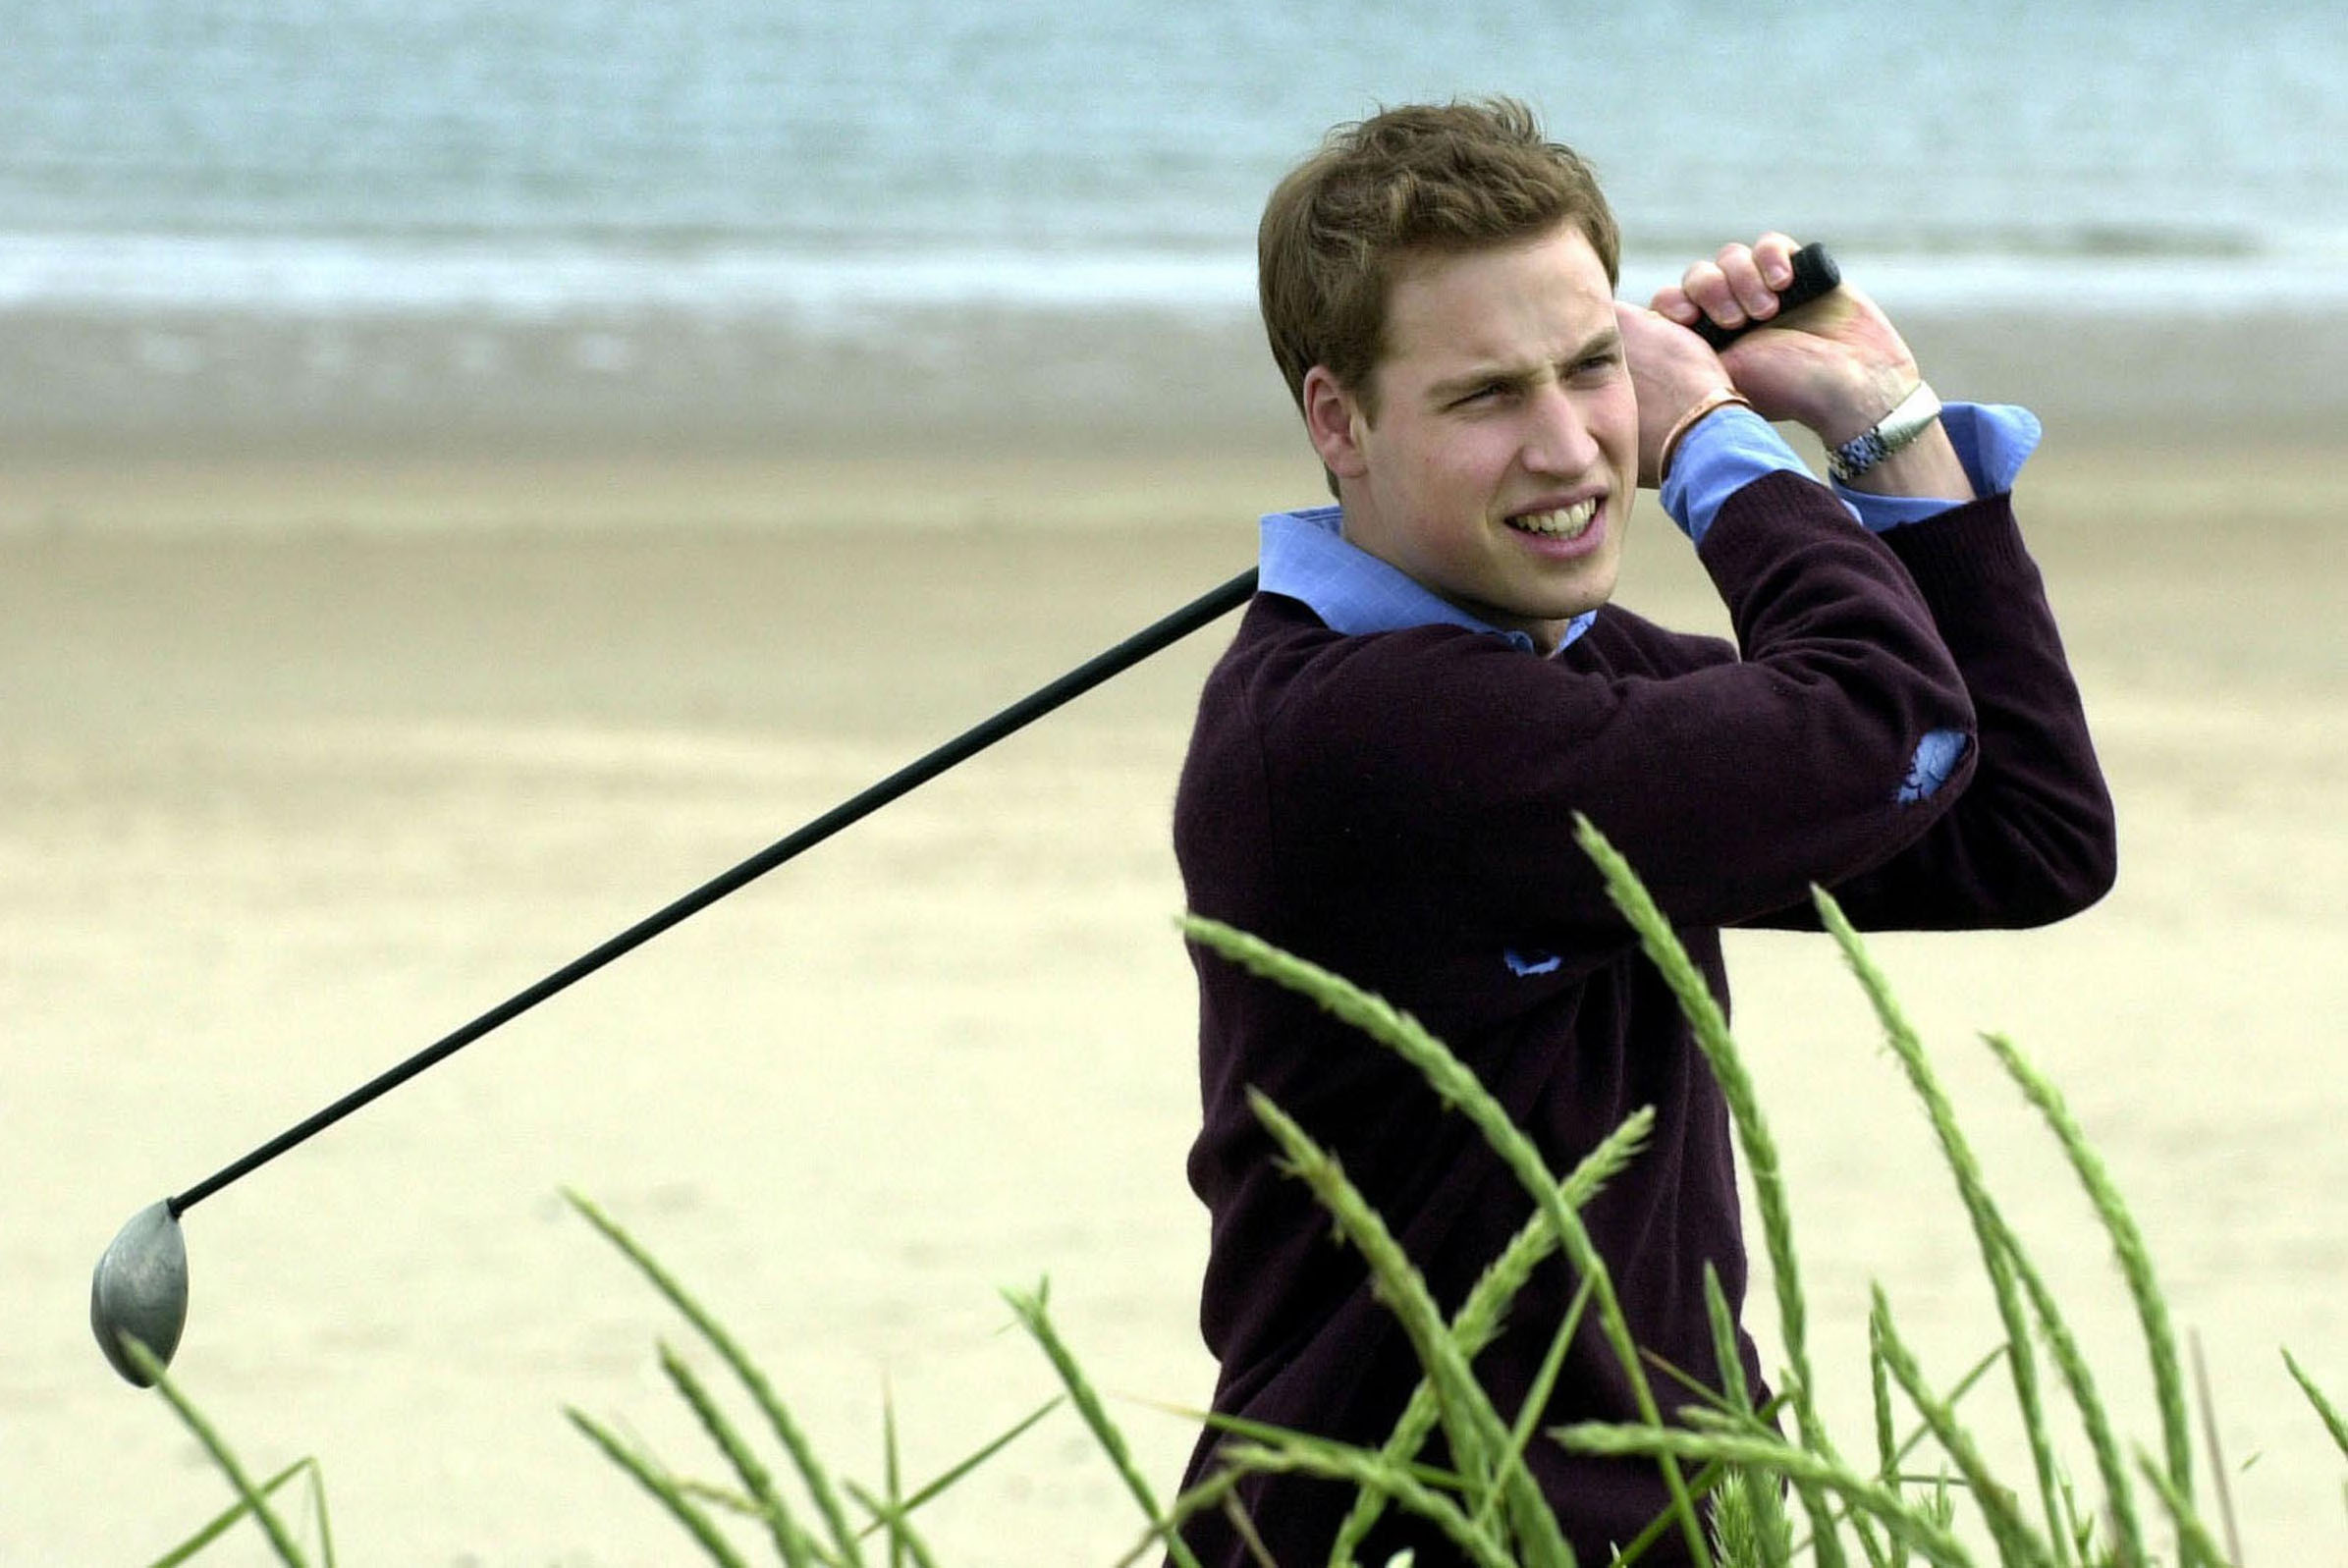 Prince William throws a practice his golf swing on the beach at St Andrews (PA)